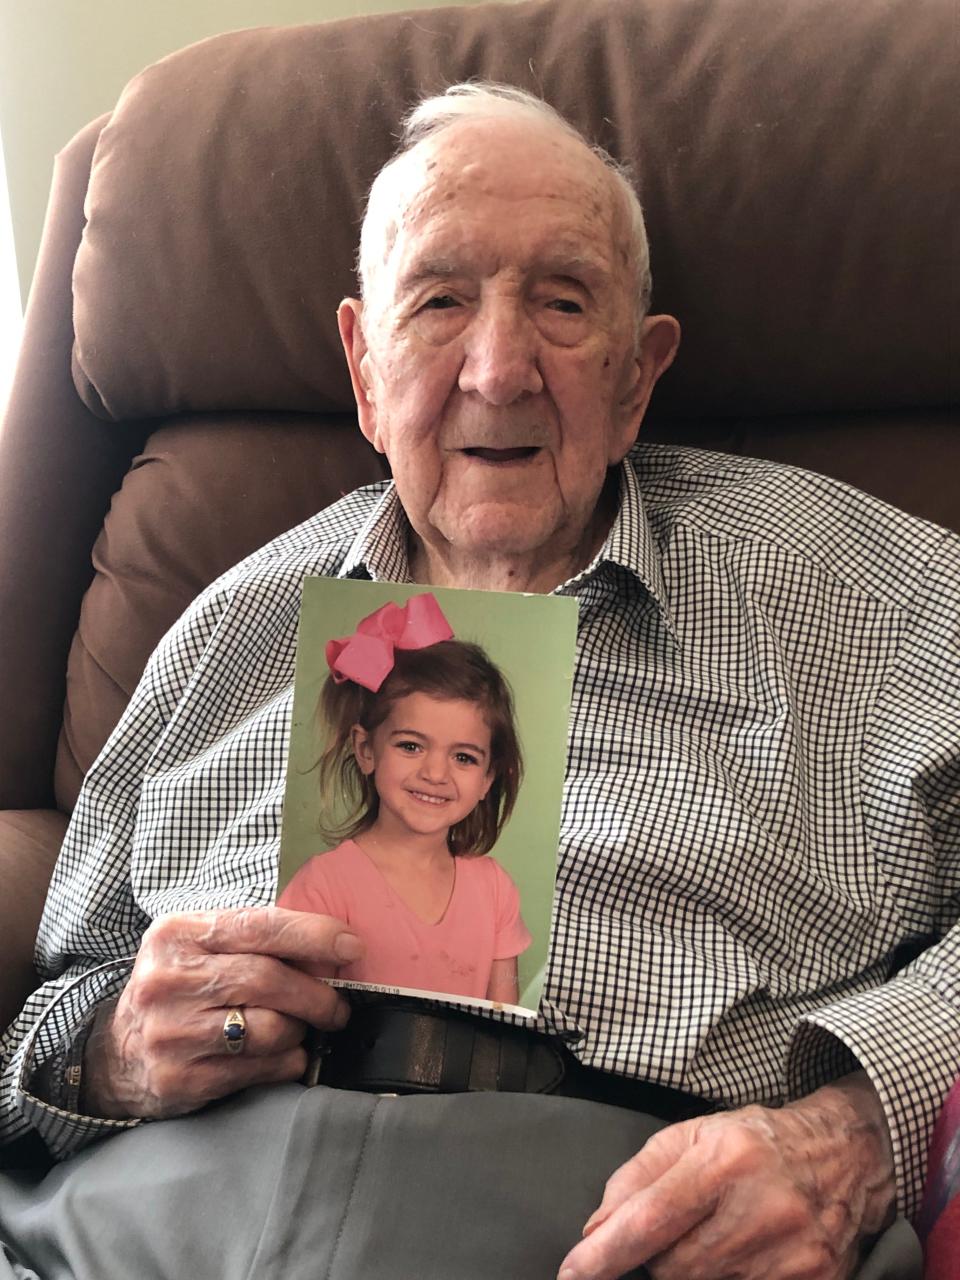 Bob Early, who turned 100 in June, holds a photo of his great granddaughter, Ellen.